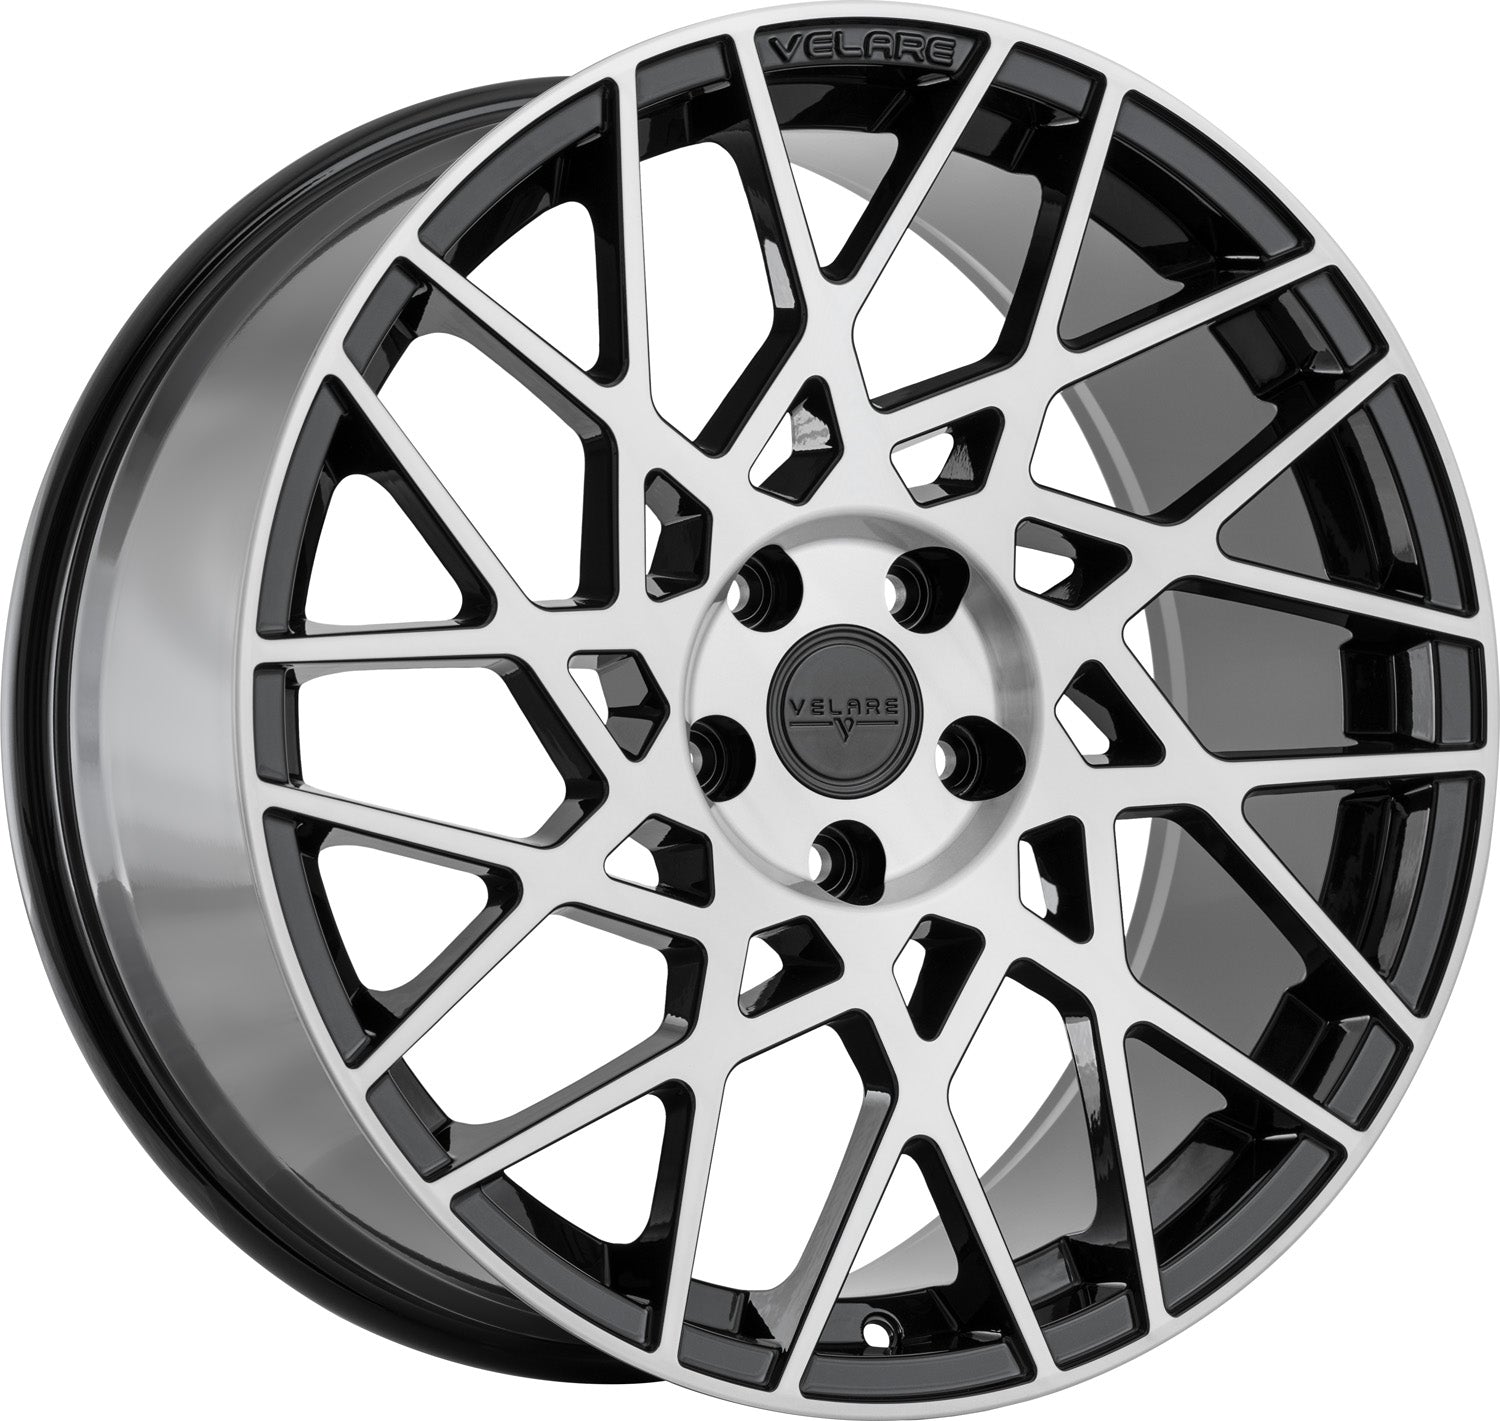 VLR03 Wheel and Tyre Package